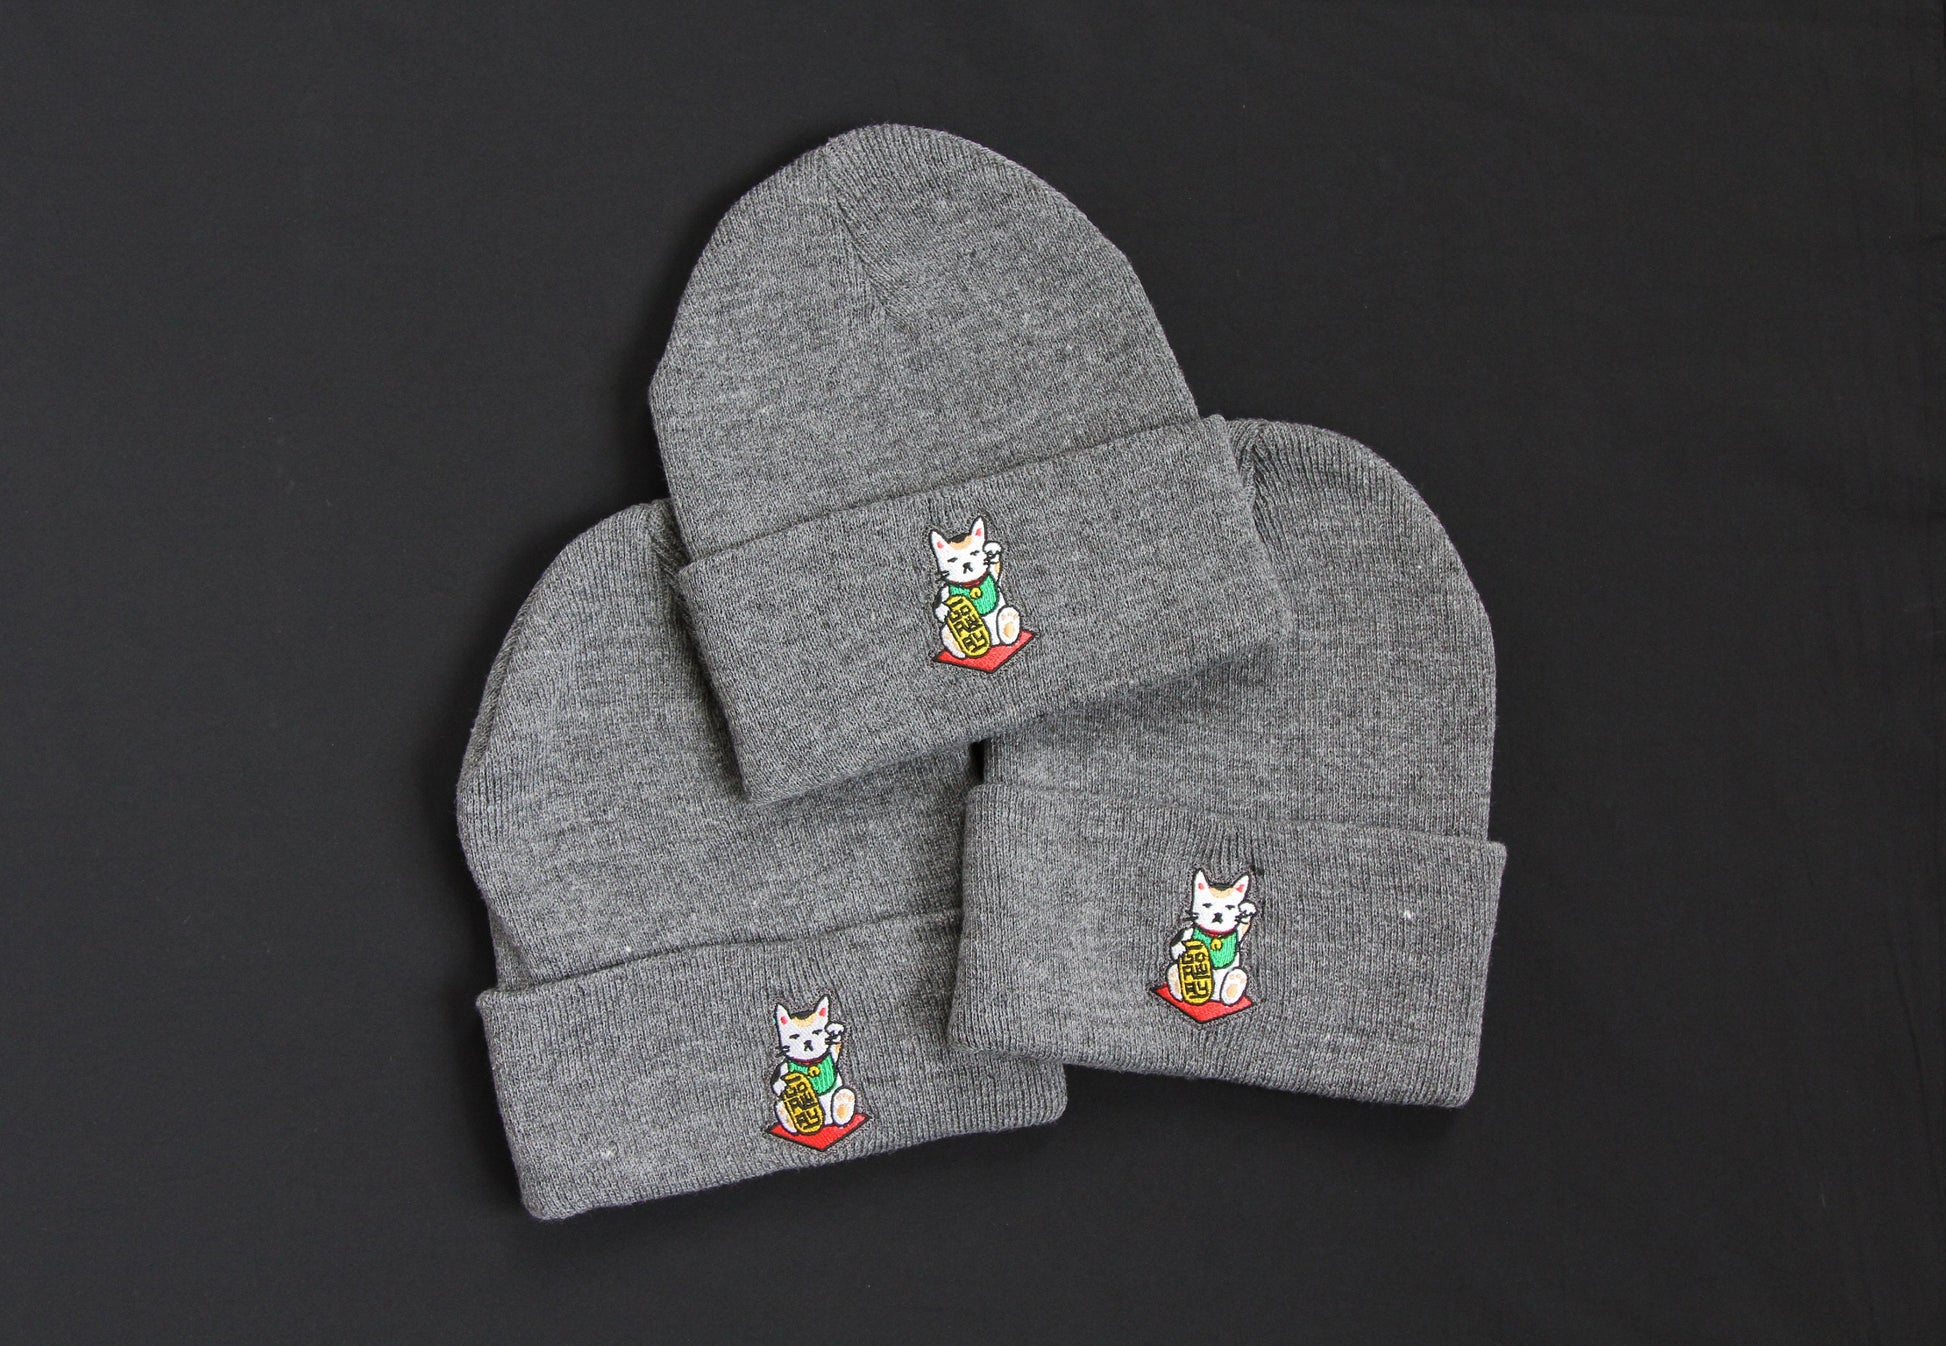 3 cuffed charcoal grey beanies with embroidered maneki neko cats holding gold bars that say "Go Away" on a black background. 